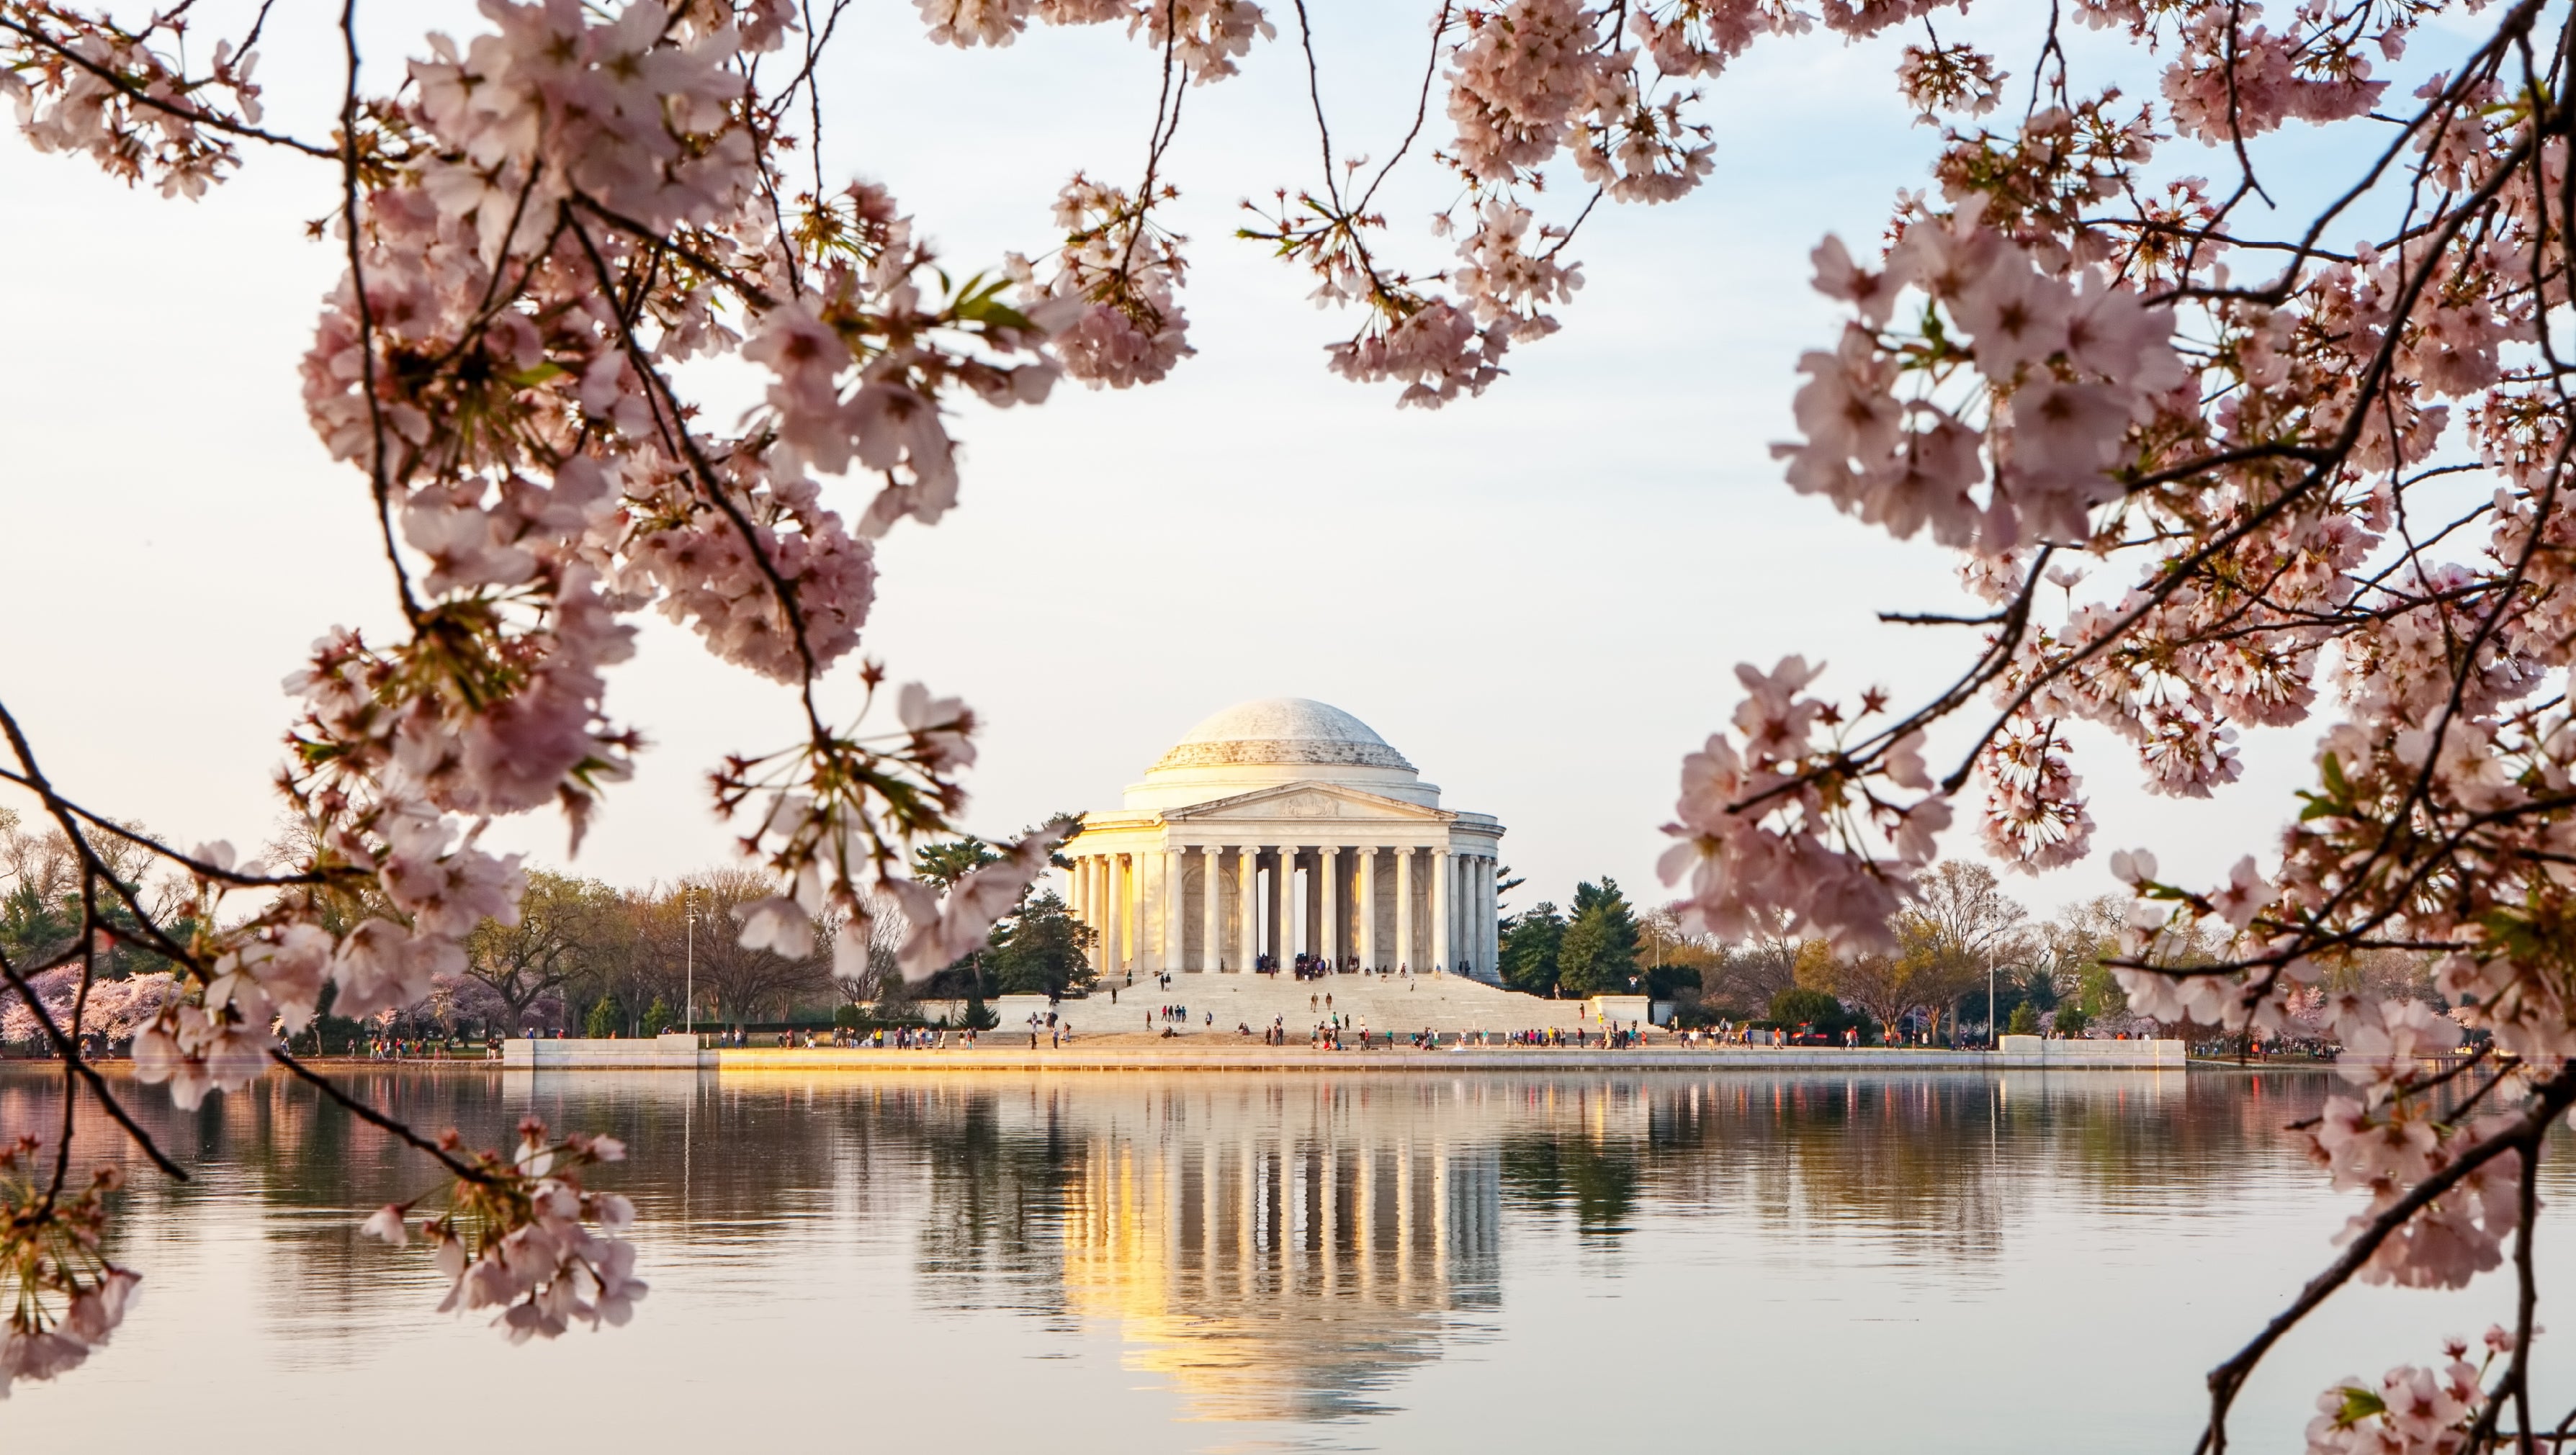 View of cherry blossoms surrounding Thomas Jefferson Memorial reflecting off the lake